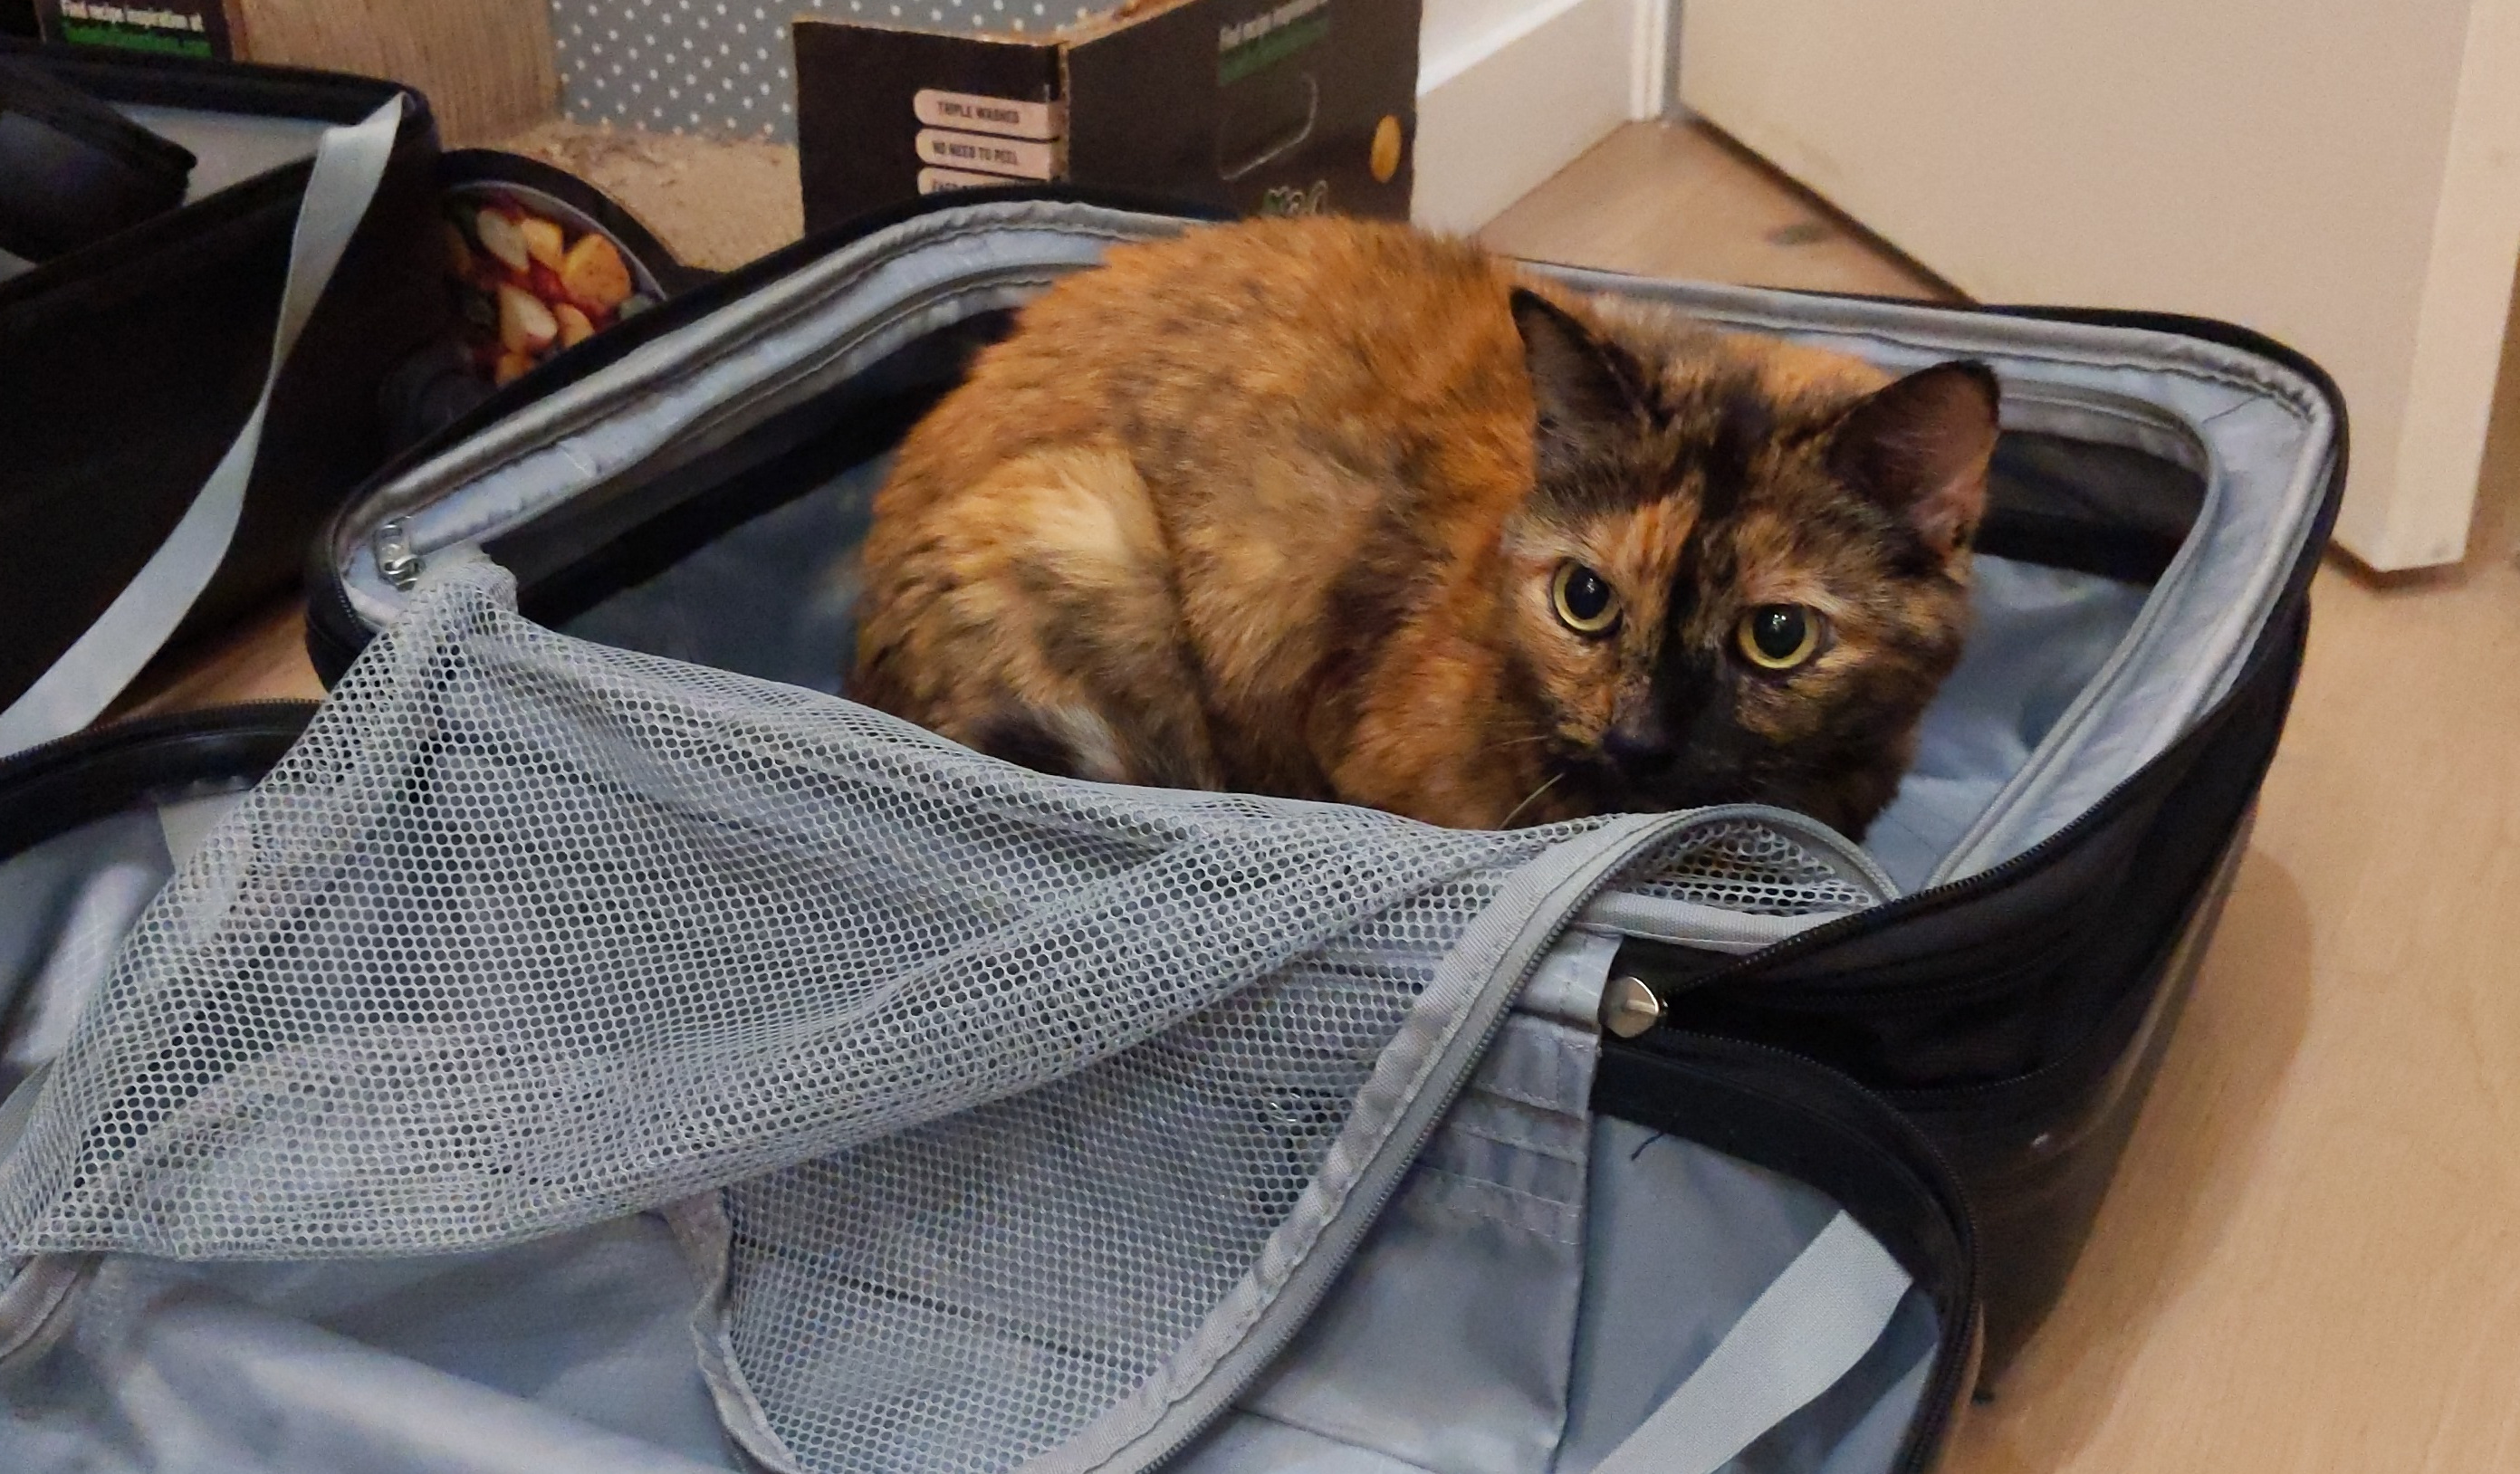 A cat sitting in a open suitcase.